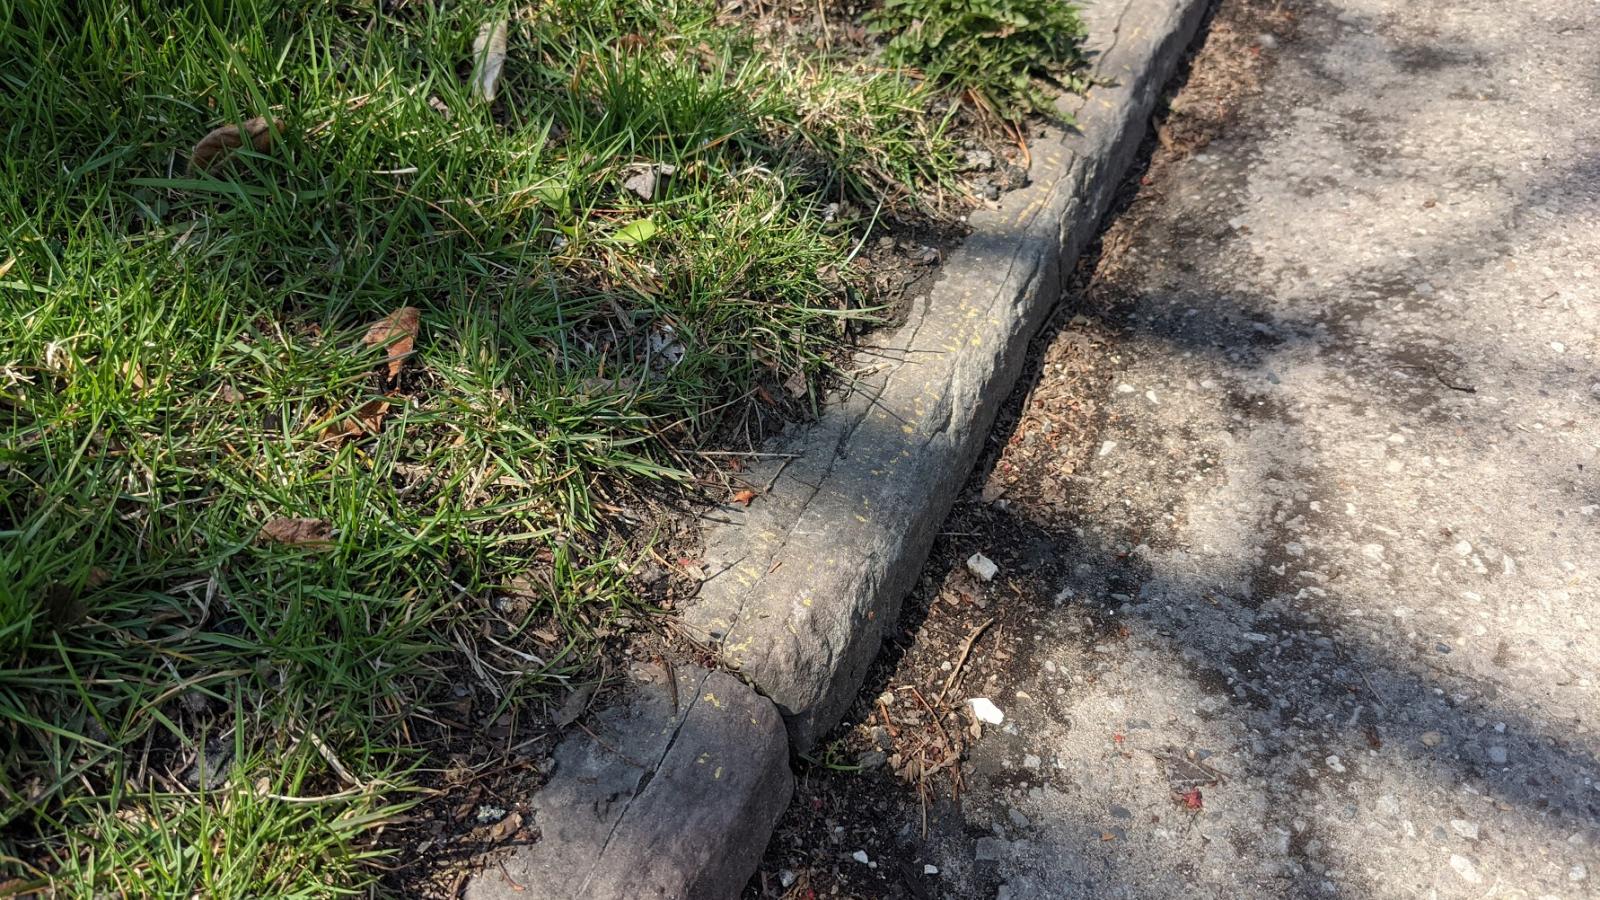 Historic stone curb in Indian Village